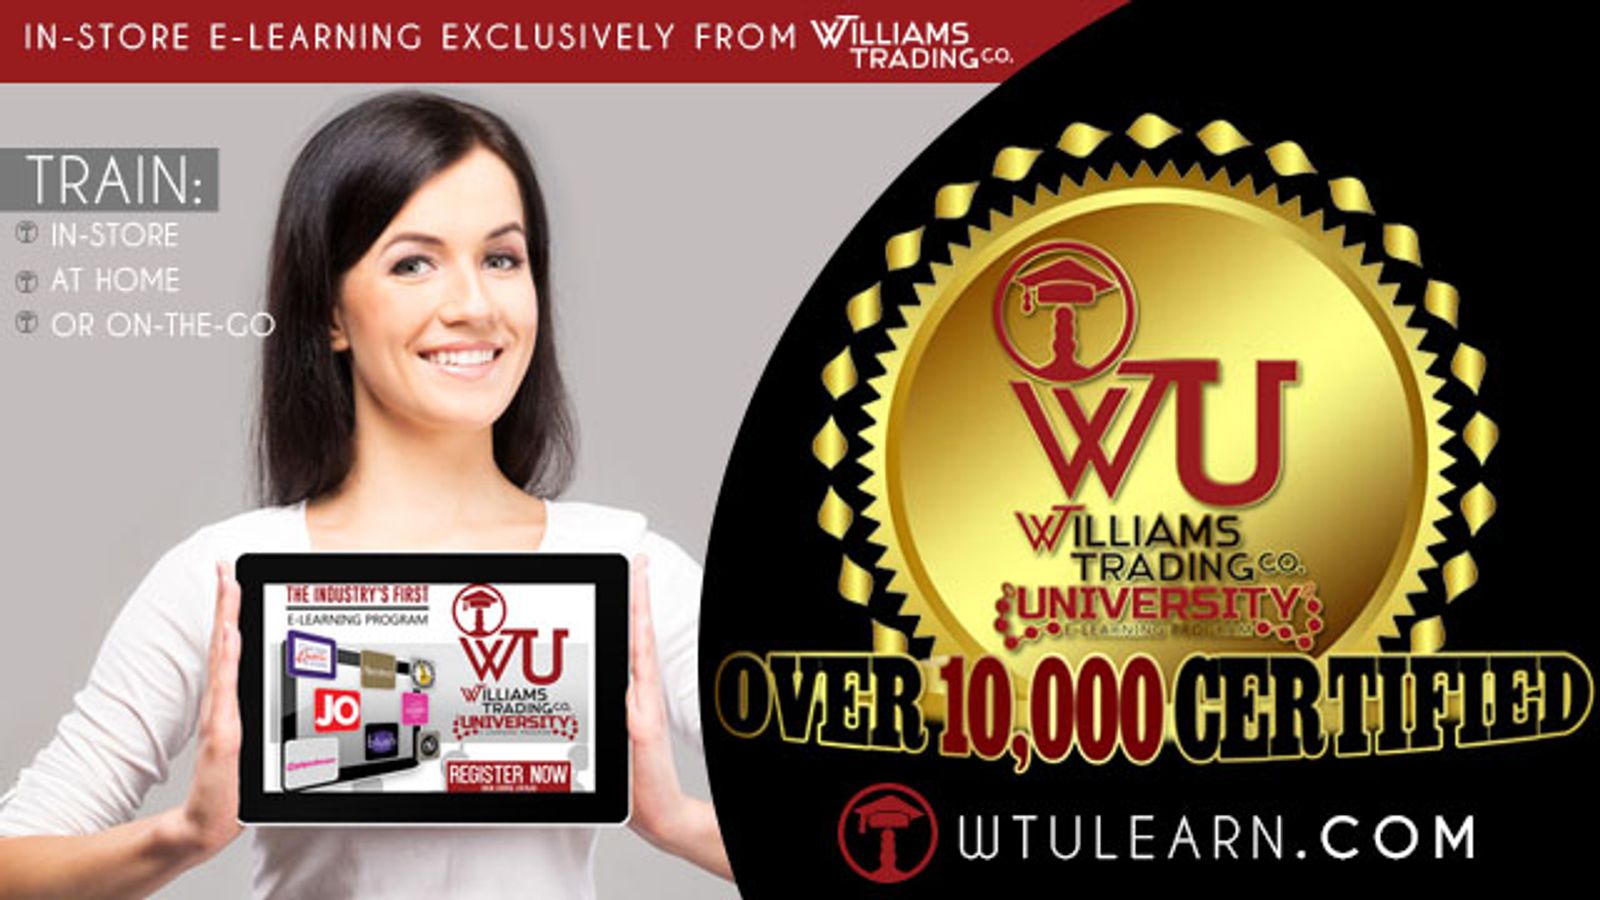 Williams Trading’s E-Learning Hits Milestone Of 10,000 Certifications